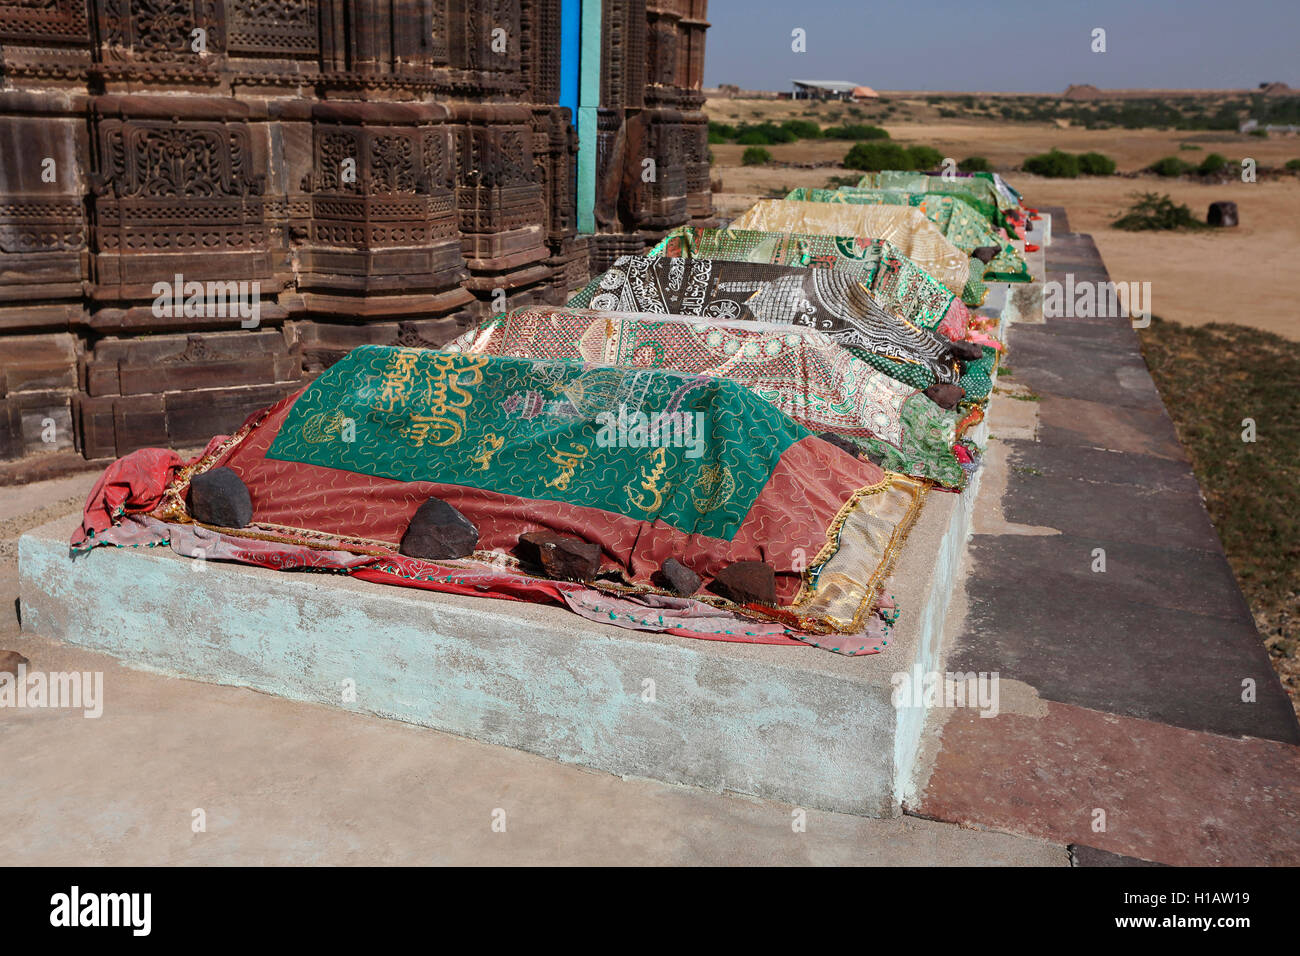 Pir muhammad ghaus tombe, tombe, lakhpat fort, kutch, Gujrat, India Banque D'Images